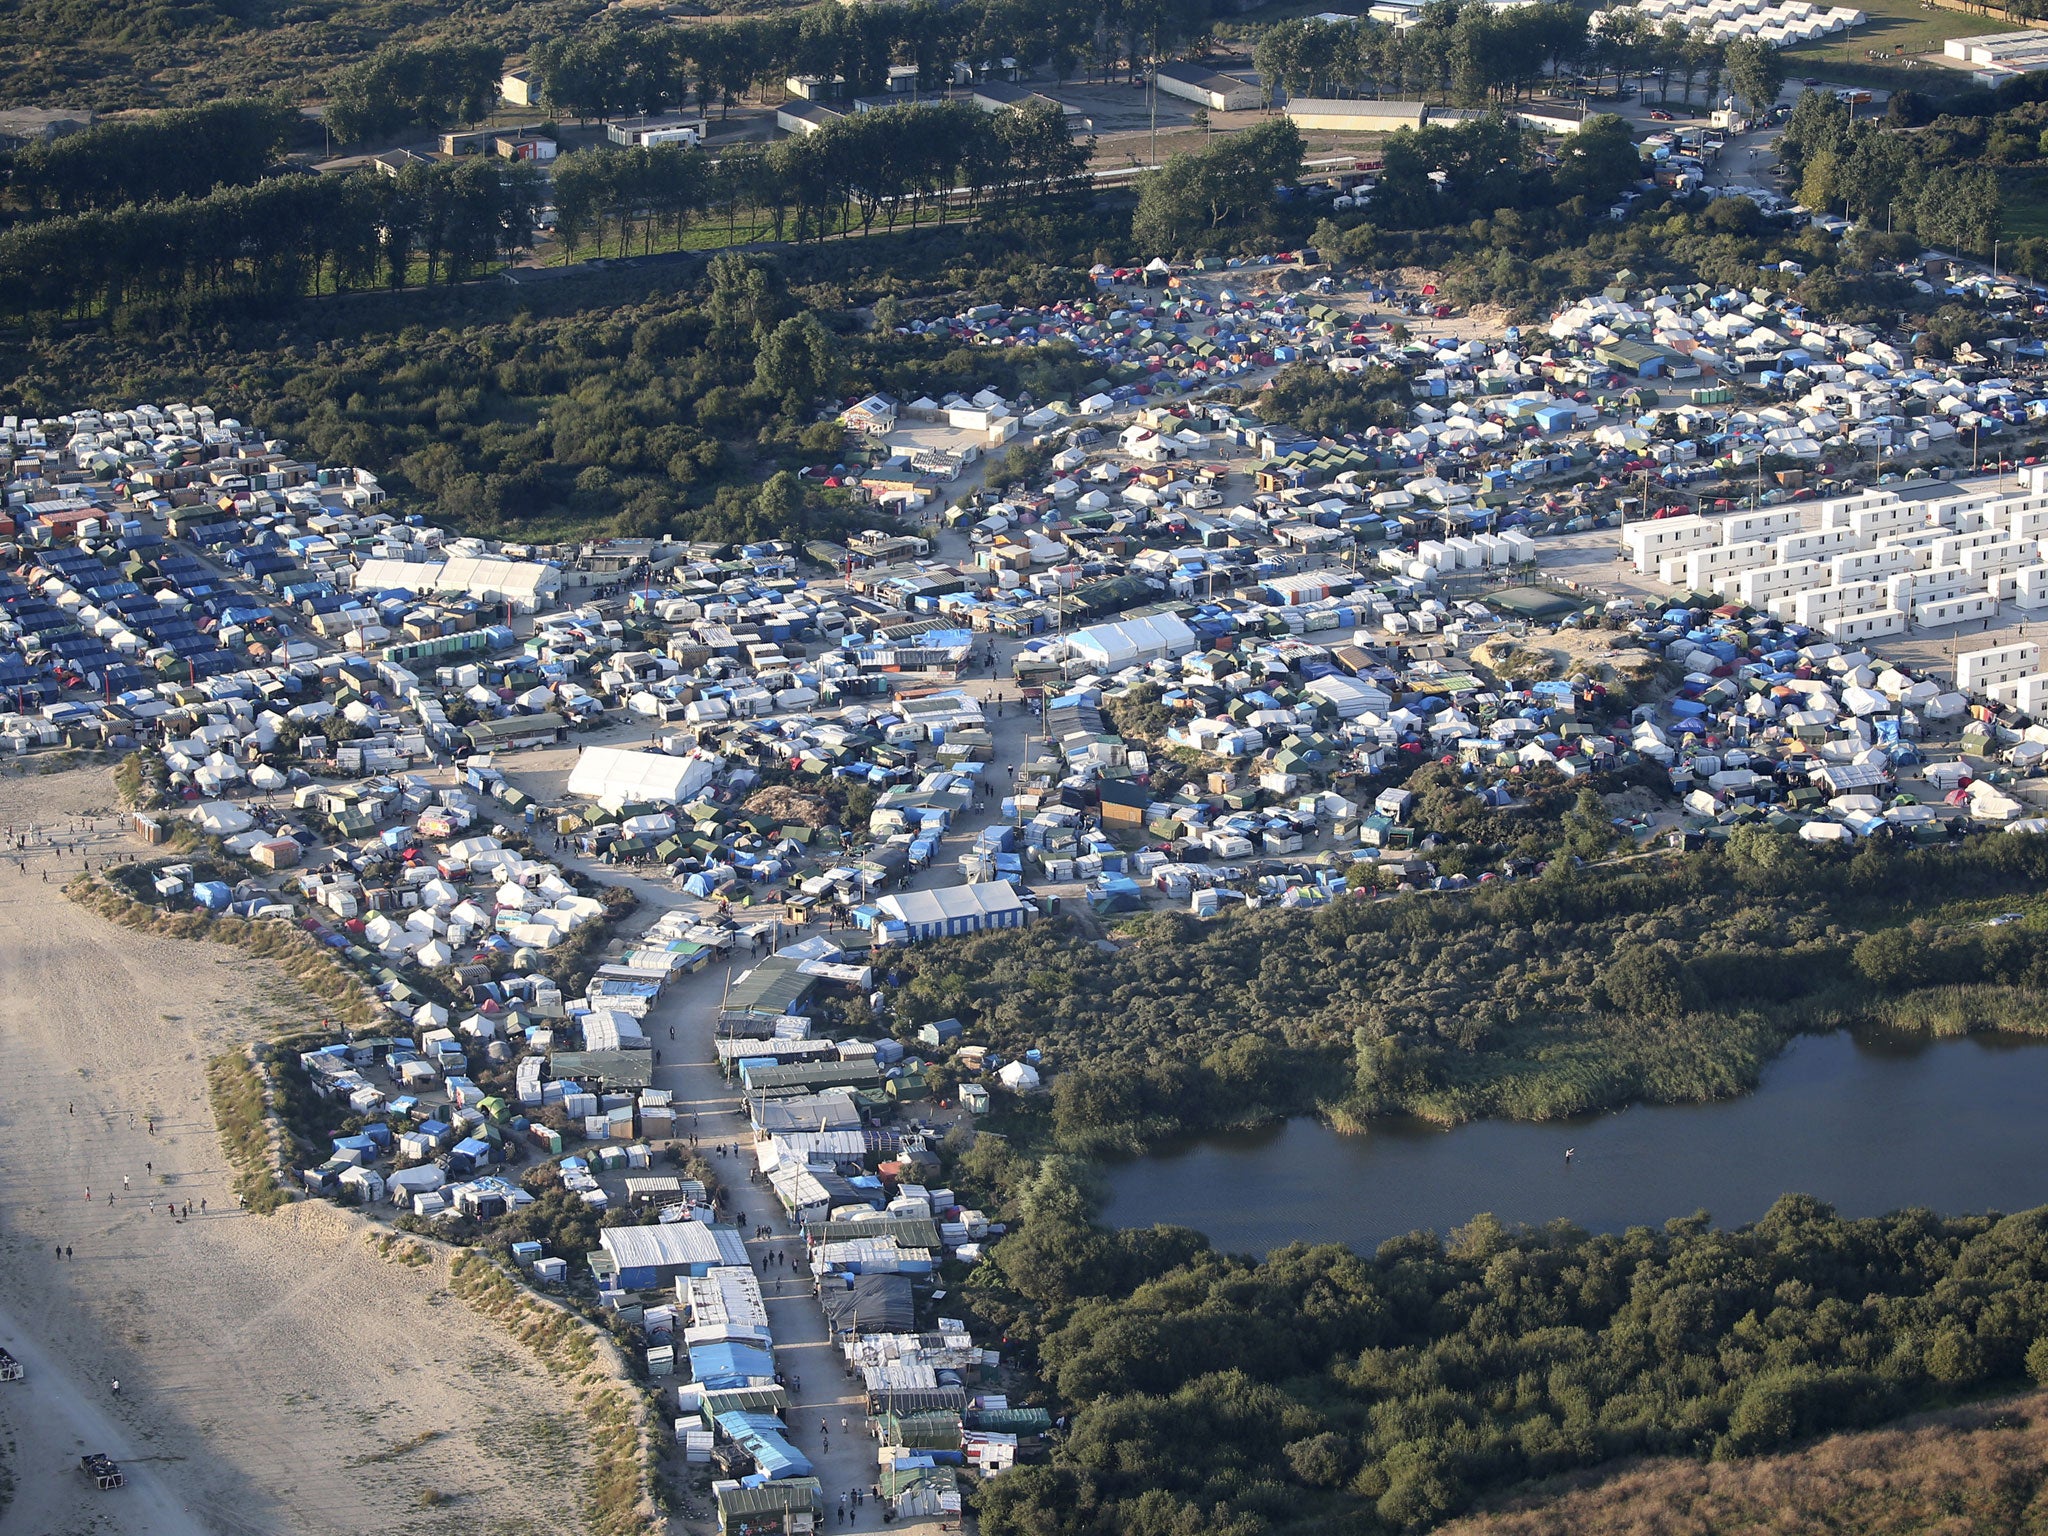 An aerial view shows makeshift shelters, tents and containers where migrants live in what is known as the Jungle, a sprawling camp in Calais, France, September 7, 2016